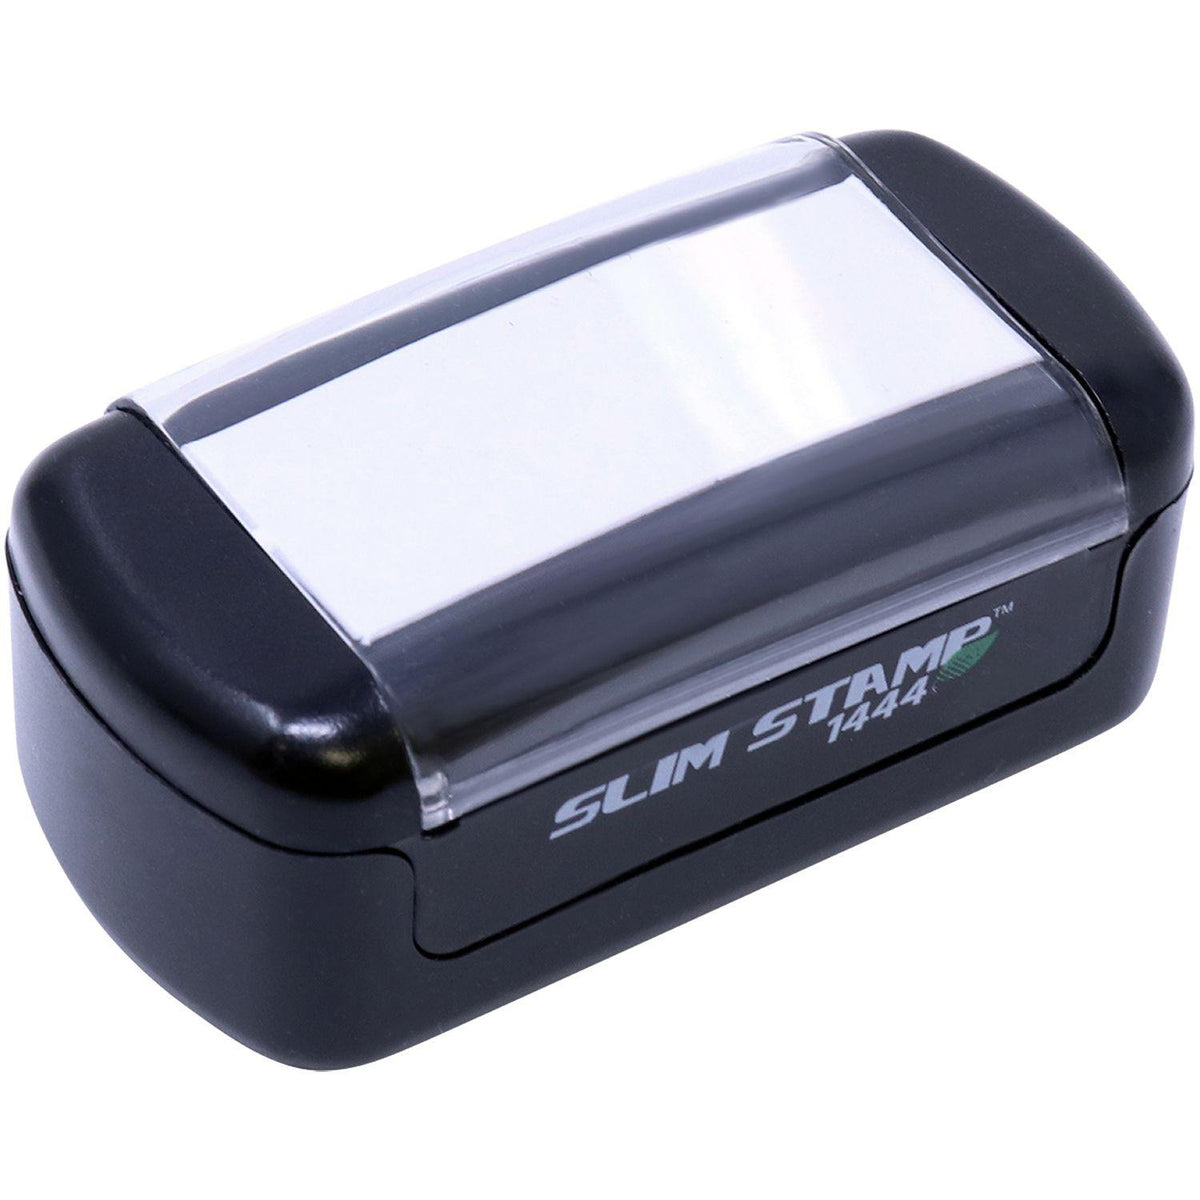 Top Down View of Slim Pre Inked Expert Witness Stamp